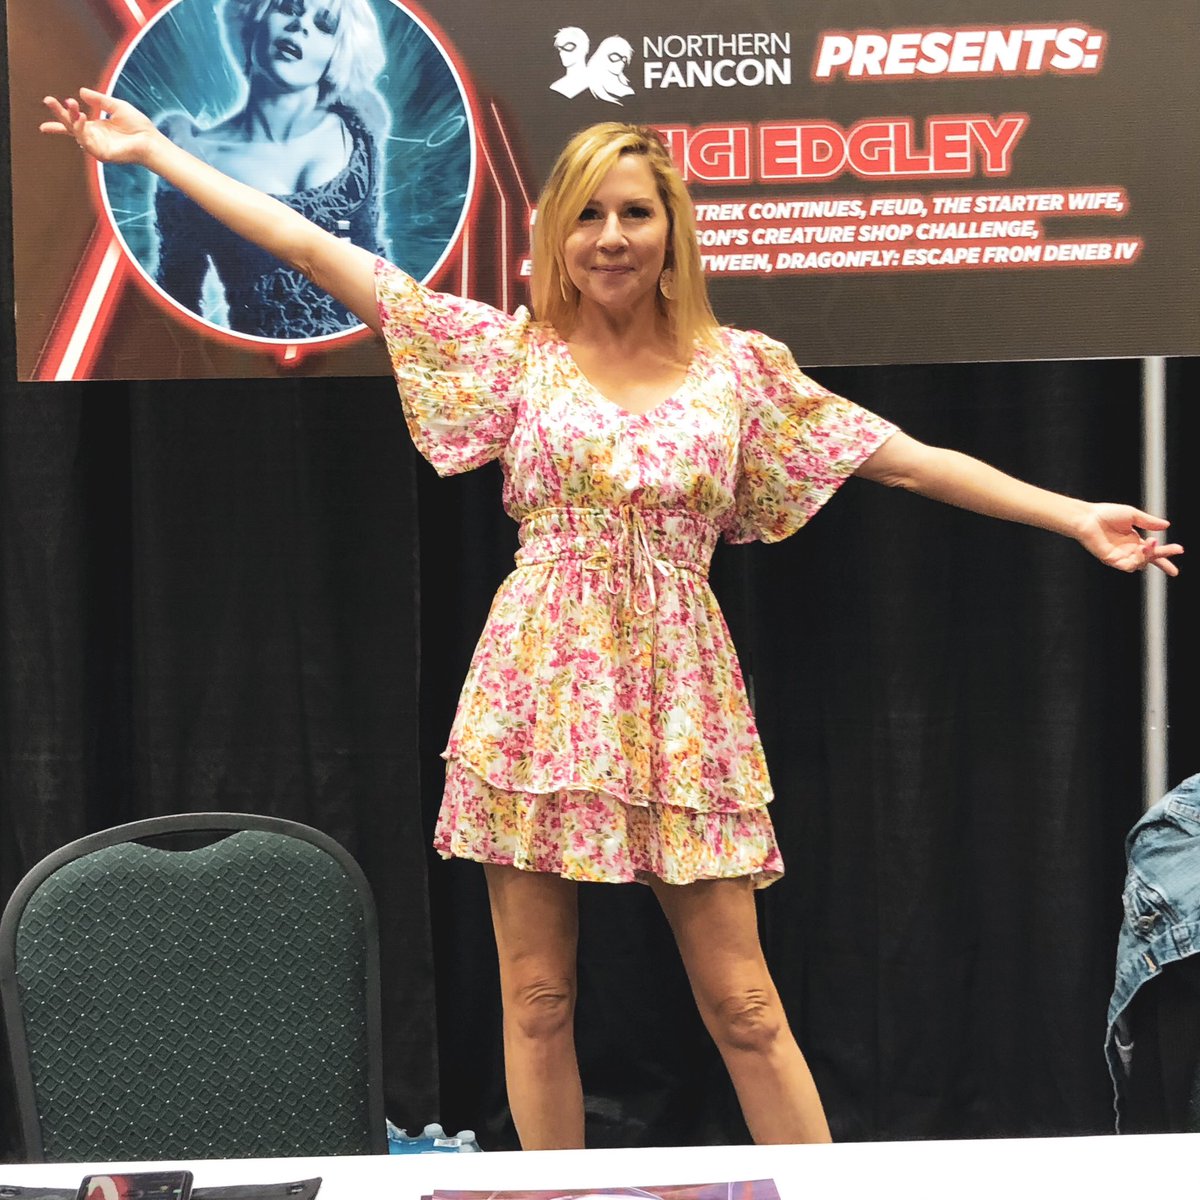 Northern FanCon loves Gigi Edgley! That’s it … that’s the post! 🖤 Come see her on the convention floor today and tomorrow! #NorthernFanCon #DecadeofFanCon #CityofPG #TakeOnPG